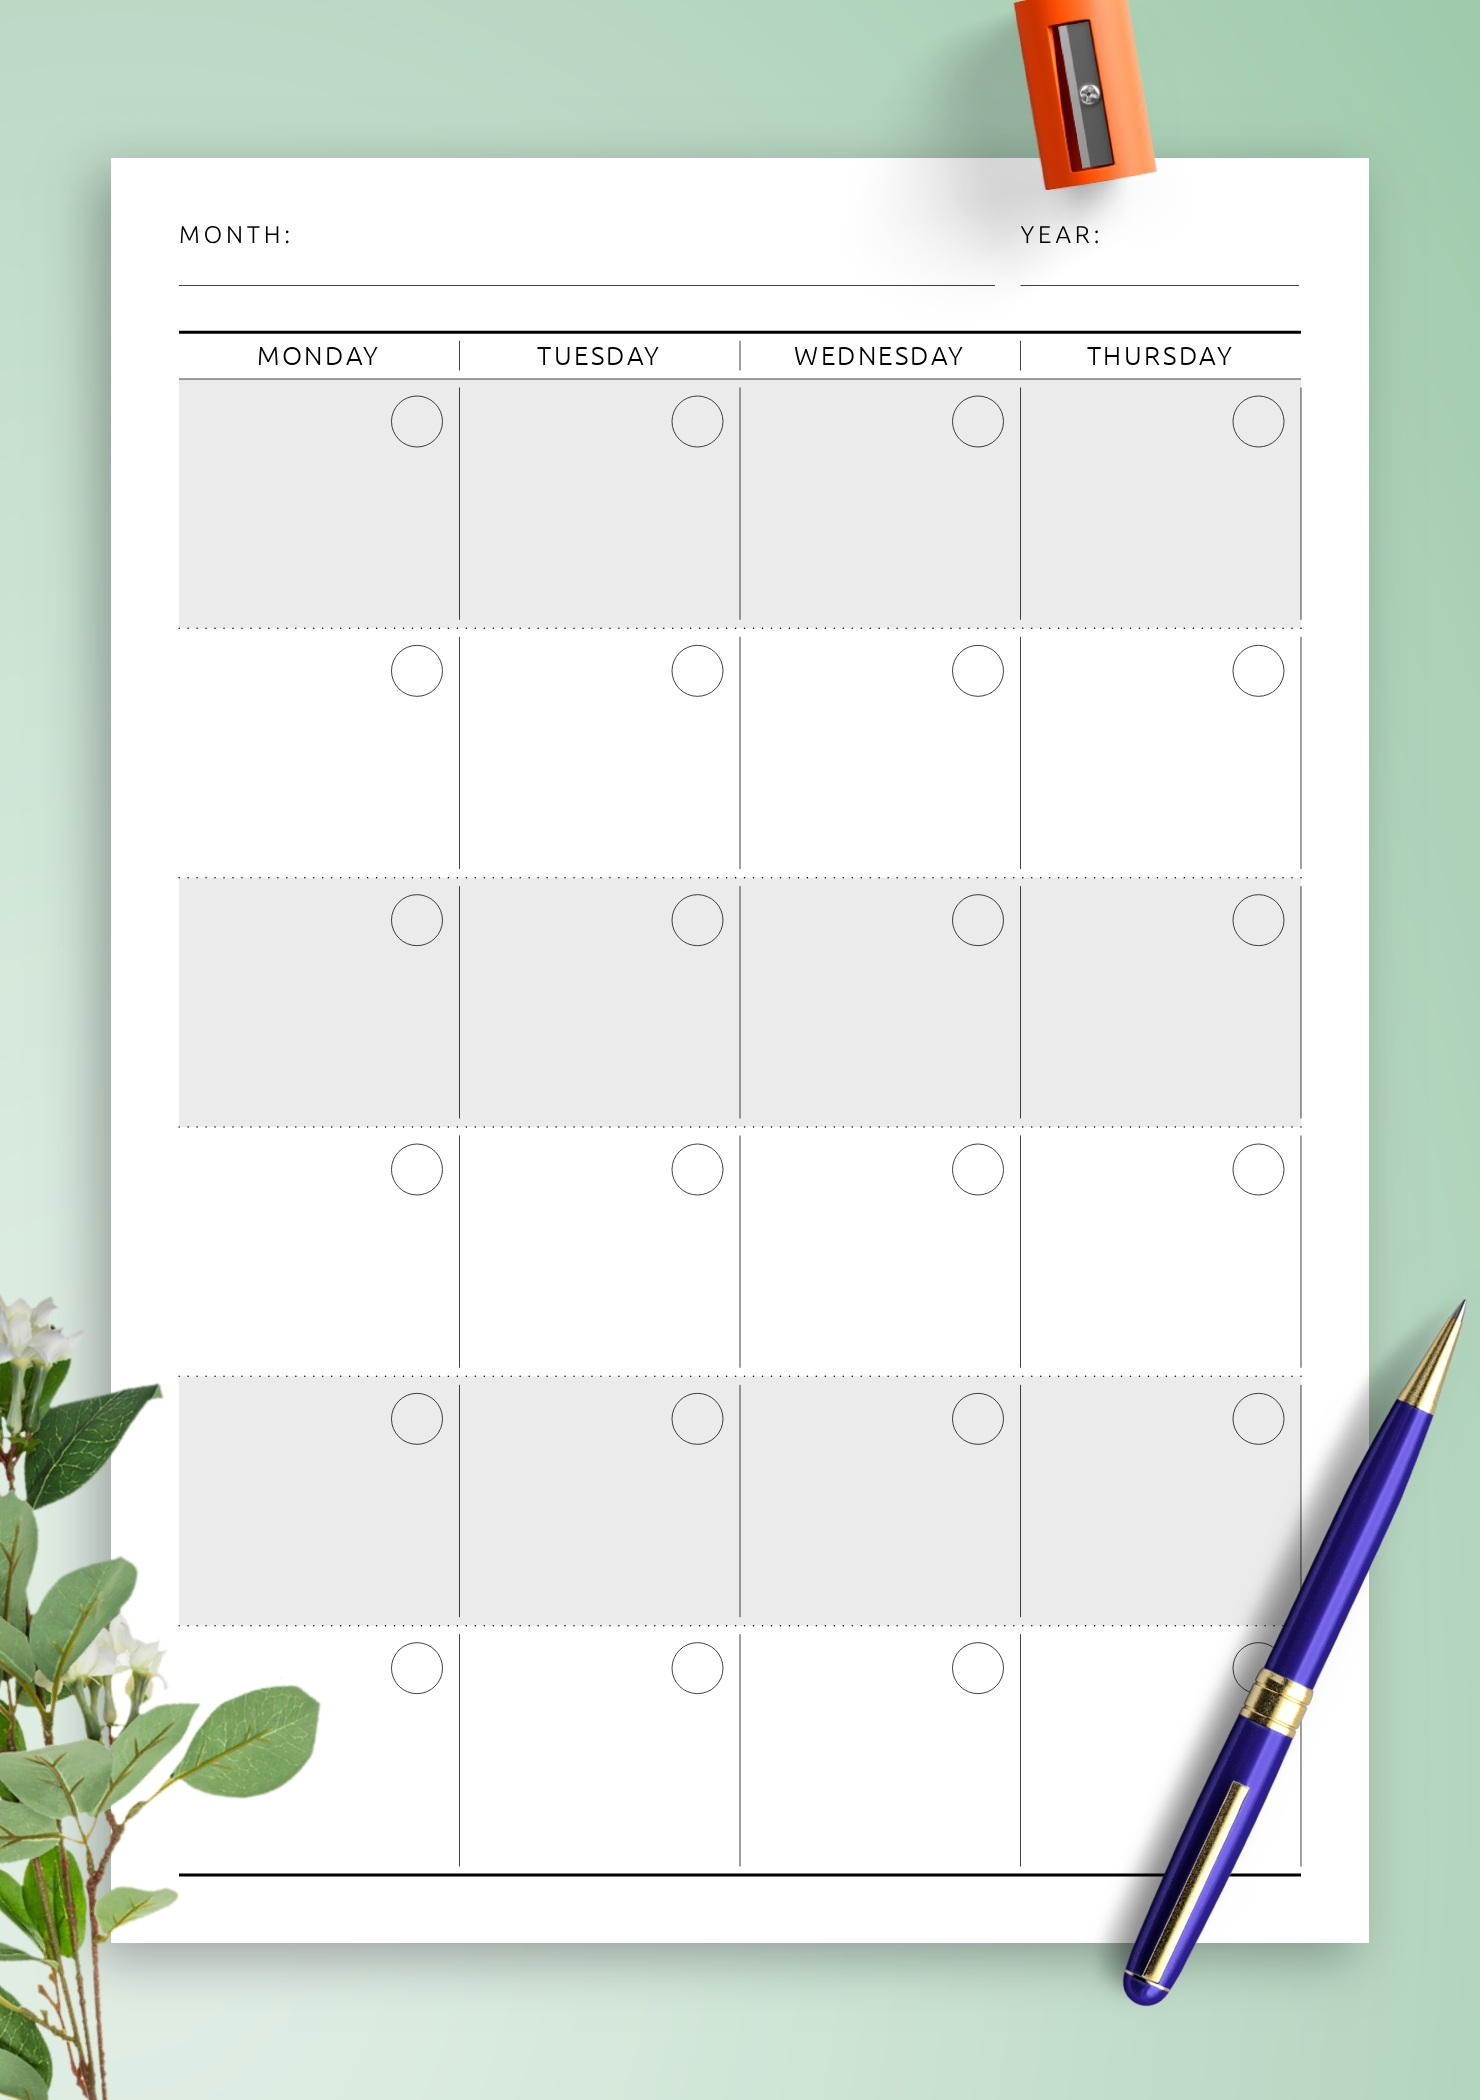 Undated Planner Calendar Template In Business Style. Month